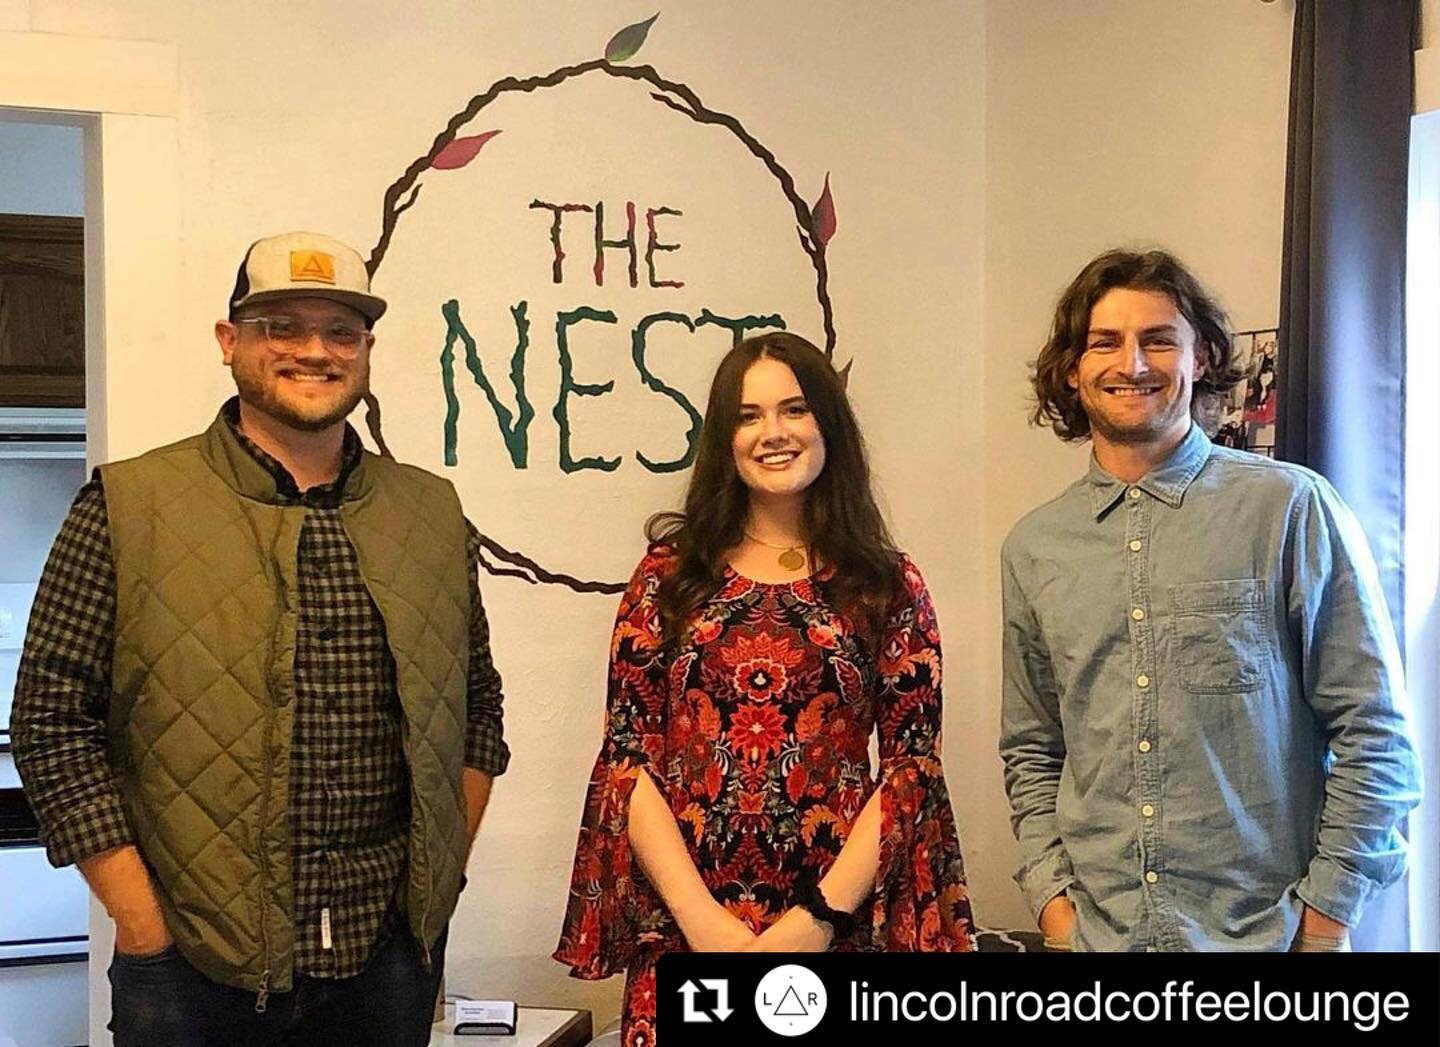 Check out our latest post at @lincolnroadcoffeelounge 
・・・
We were honored to share our entrepreneurial journey yesterday at @thenestswva in hopes that it would inspire students to think about entrepreneurship as a career pathway - big time shoutout 